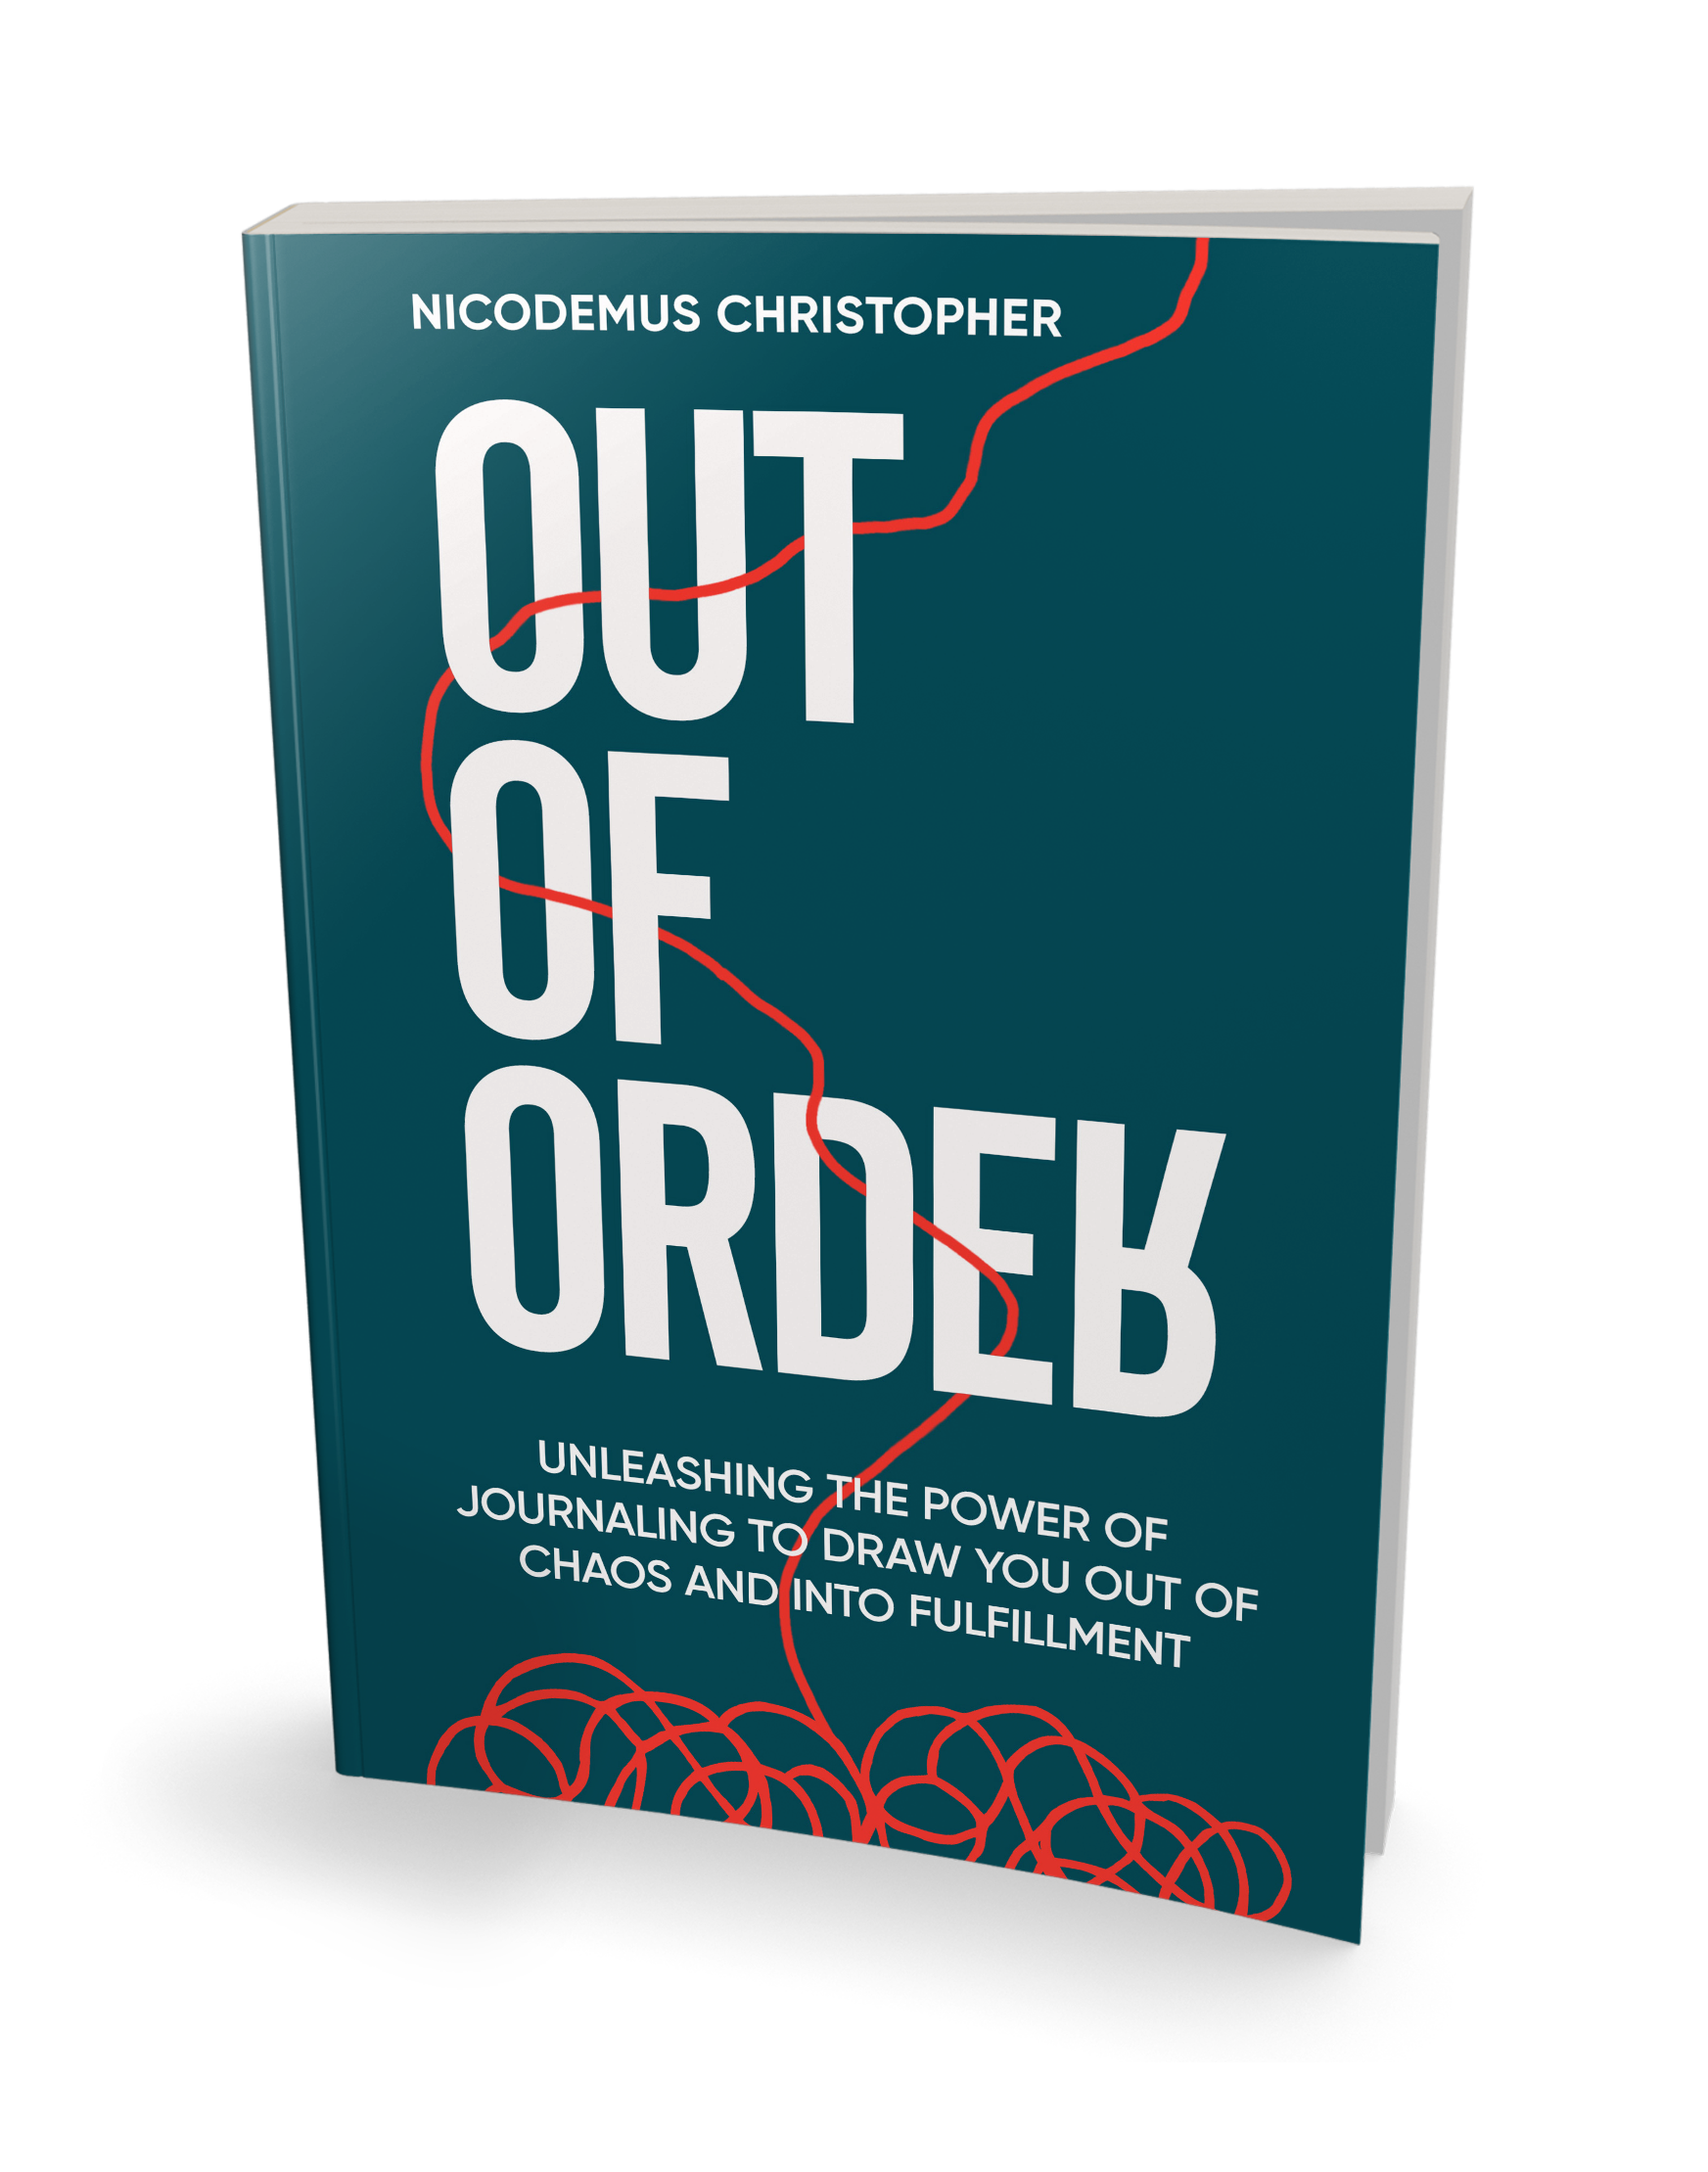 Nicodemus Christopher’s New Book ‘Out of Order’ Looks to Impact the Youth